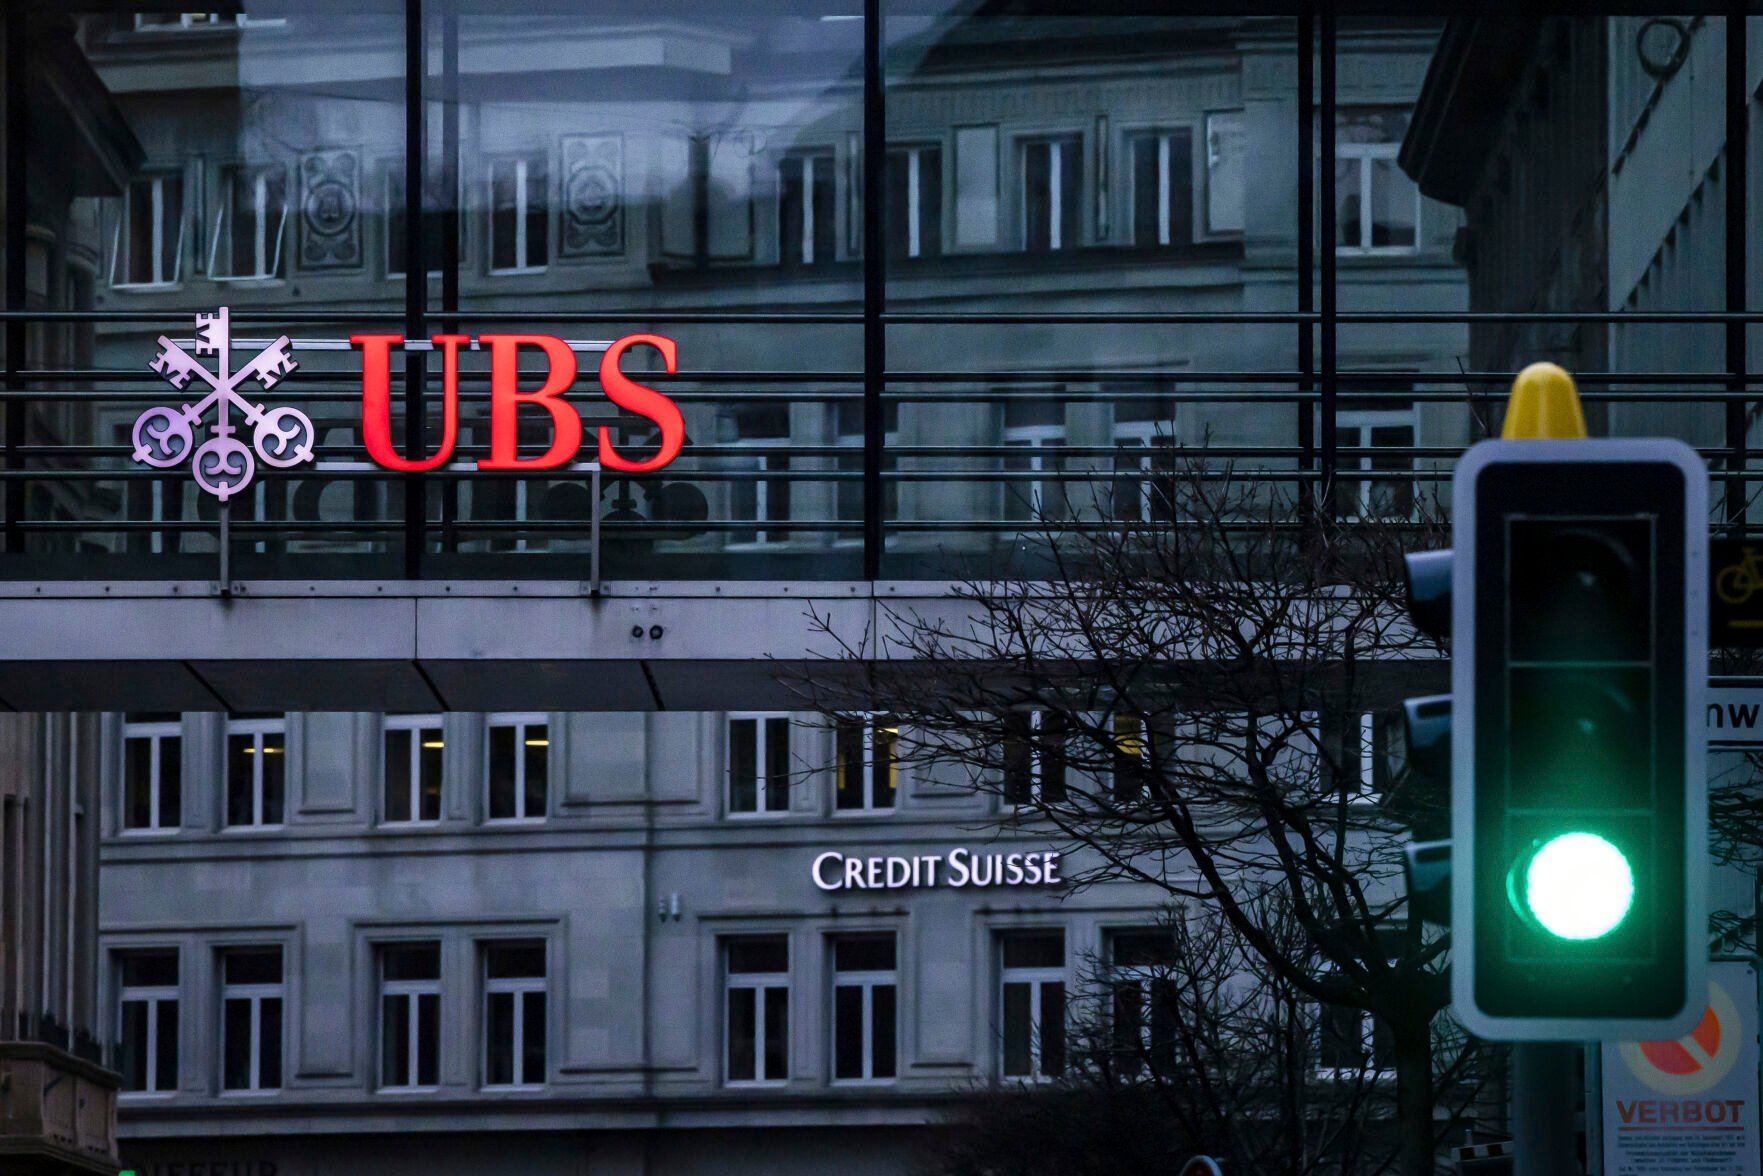 <p>A traffic light signals green in front of the logos of the Swiss banks Credit Suisse and UBS in Zurich, Switzerland, Sunday March 19, 2023. (Michael Buholzer/Keystone via AP)</p>   PHOTO CREDIT: Michael Buholzer